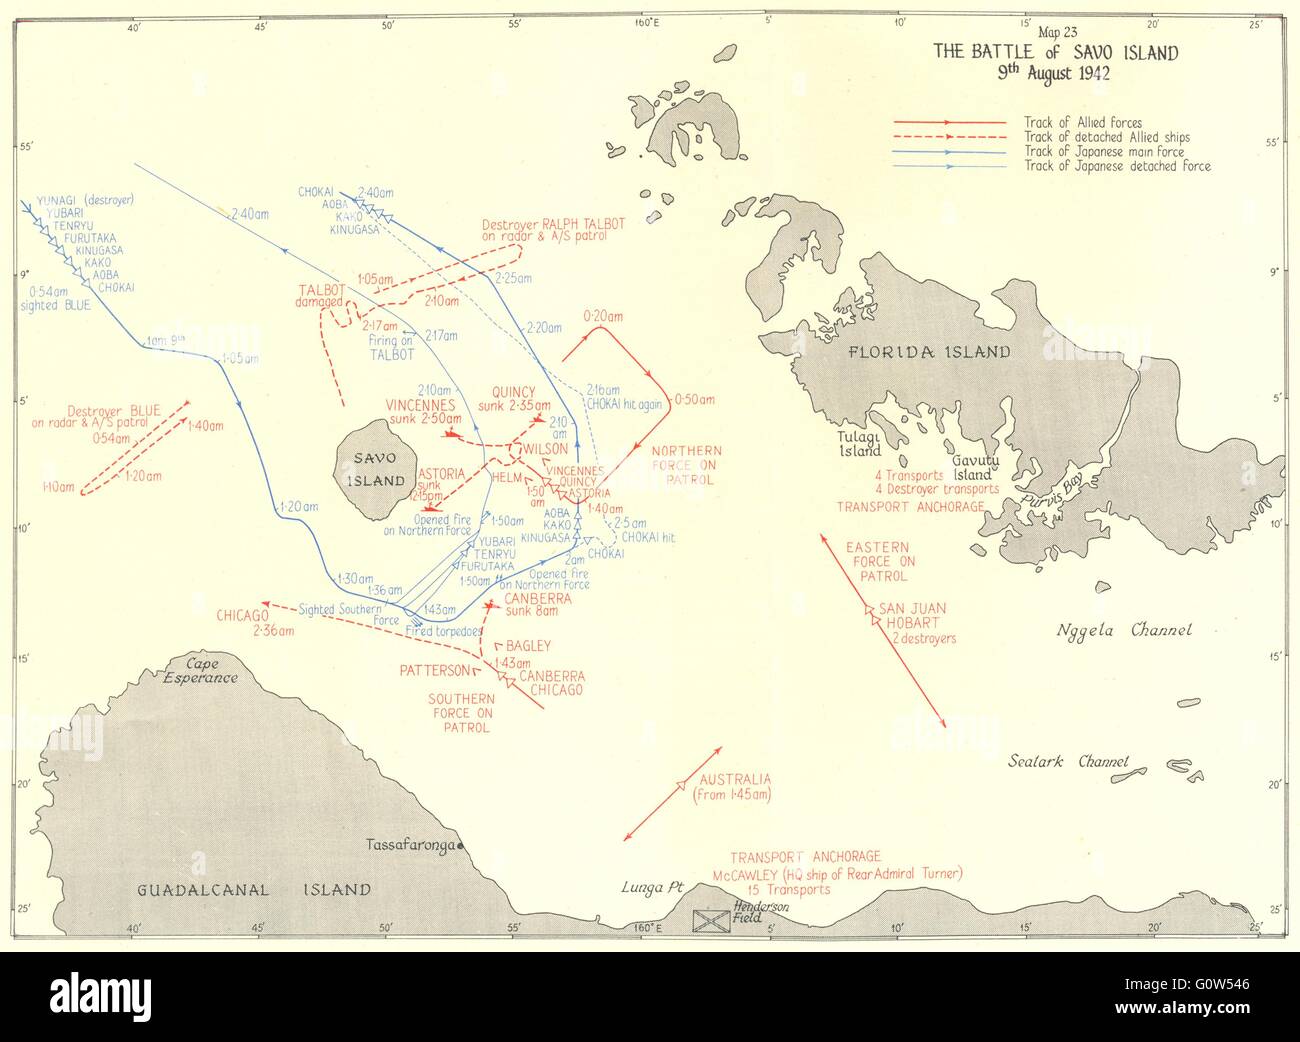 PACIFIC OCEAN: The Battle of Savo Island 9th August 1942, 1956 vintage map Stock Photo